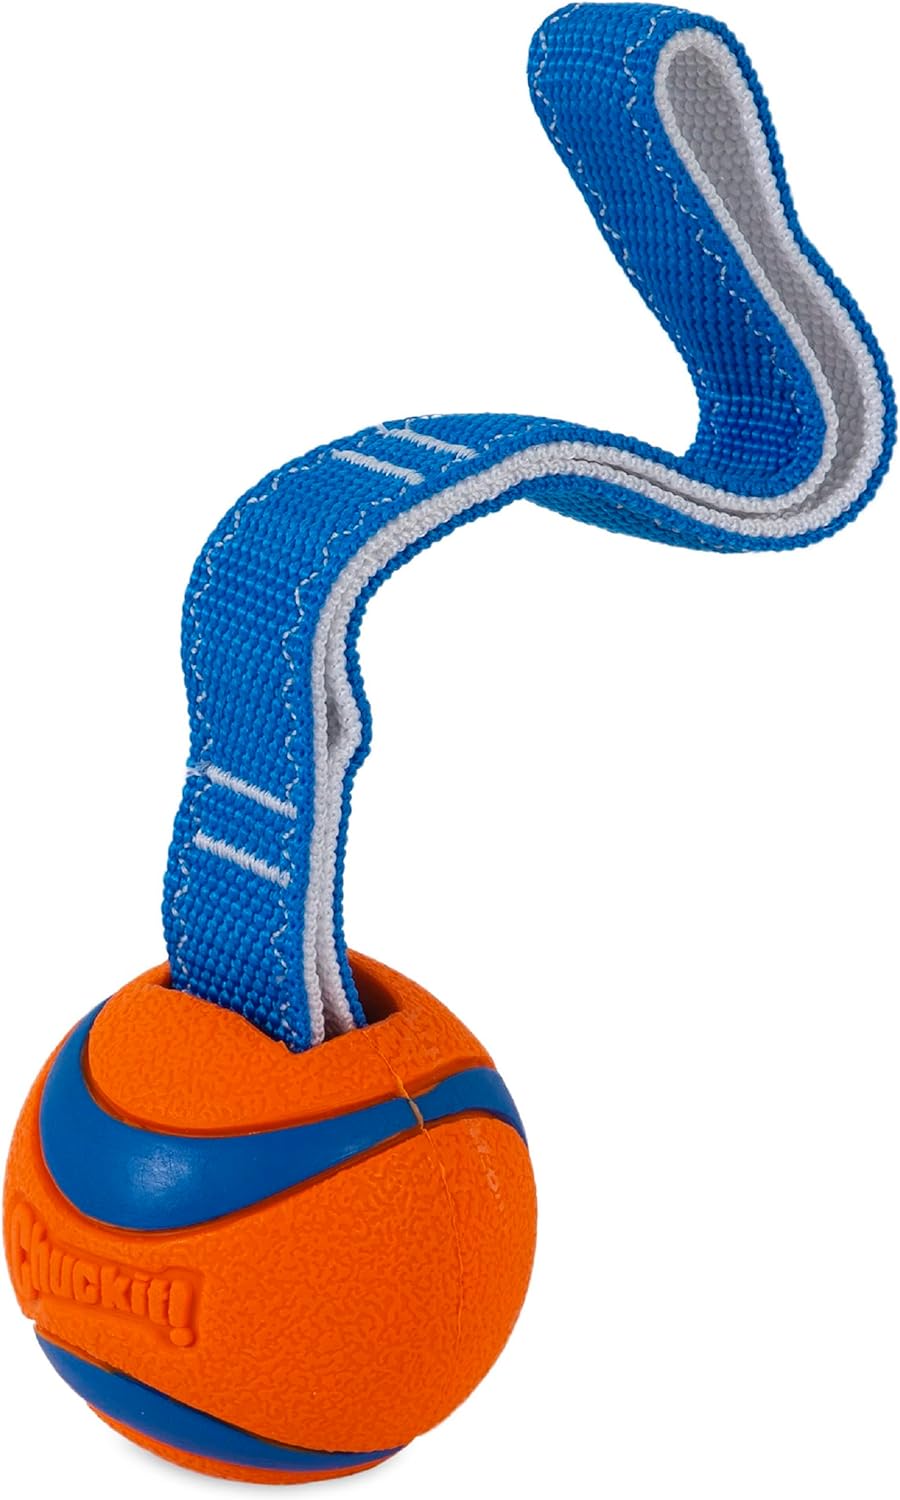 Chuckit! Ultra Tug Dog Toy, Medium Fetch and Dog Ball Tug Toy for Dogs 20-60 Pounds [Subscribe & Save] $4.80 @ Amazon